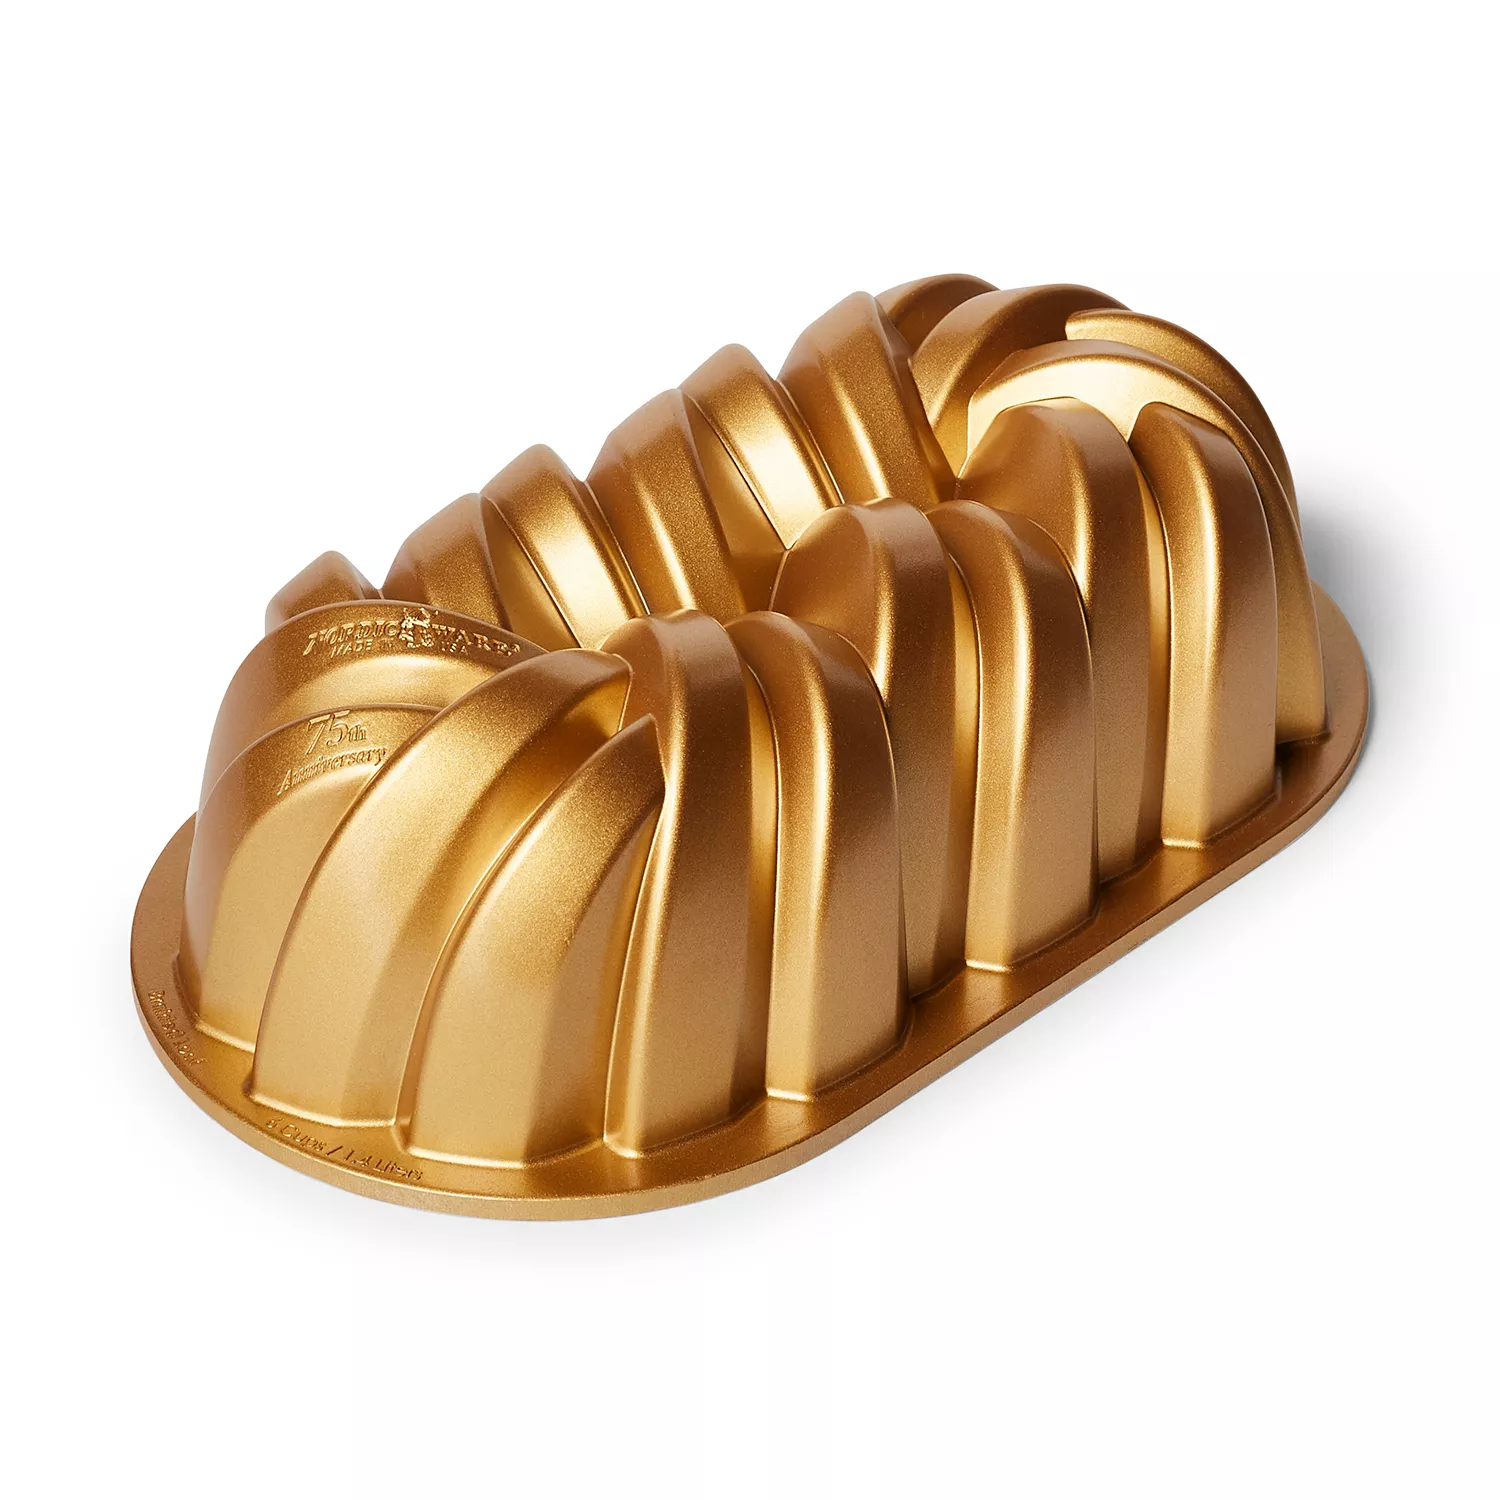 75th Anniversary Braided Loaf Pan